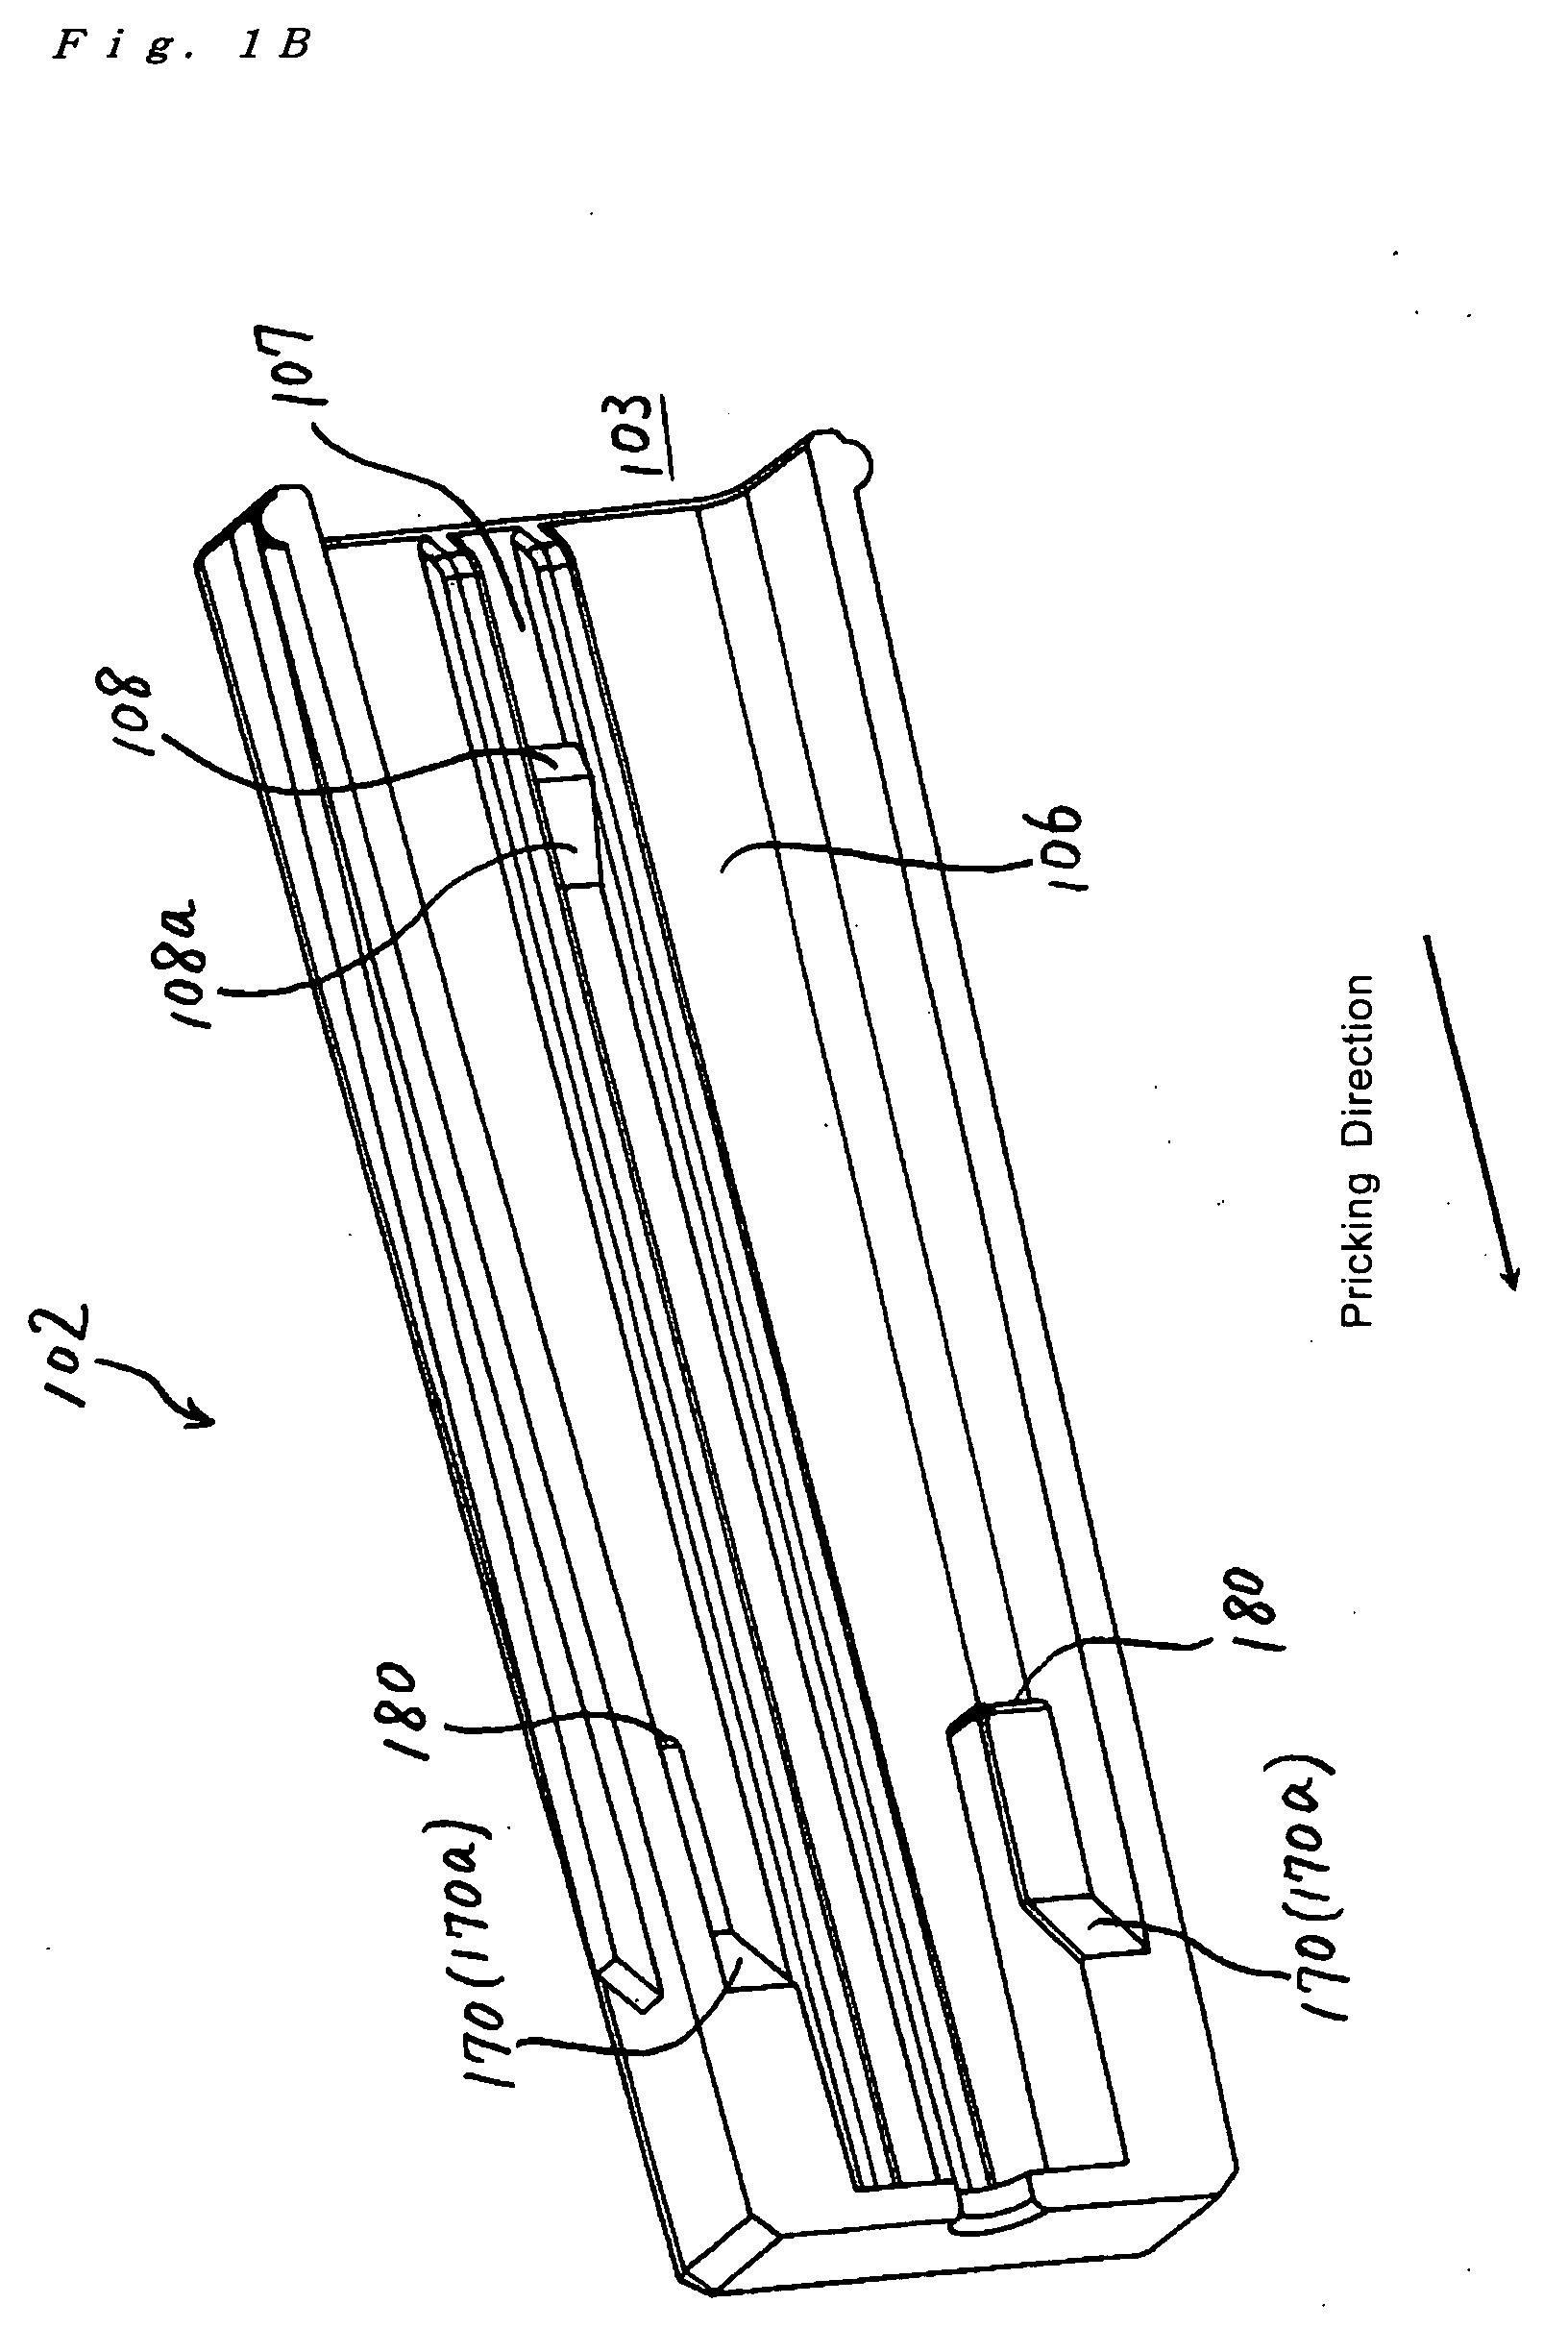 Lancet Assembly and Pricking Device